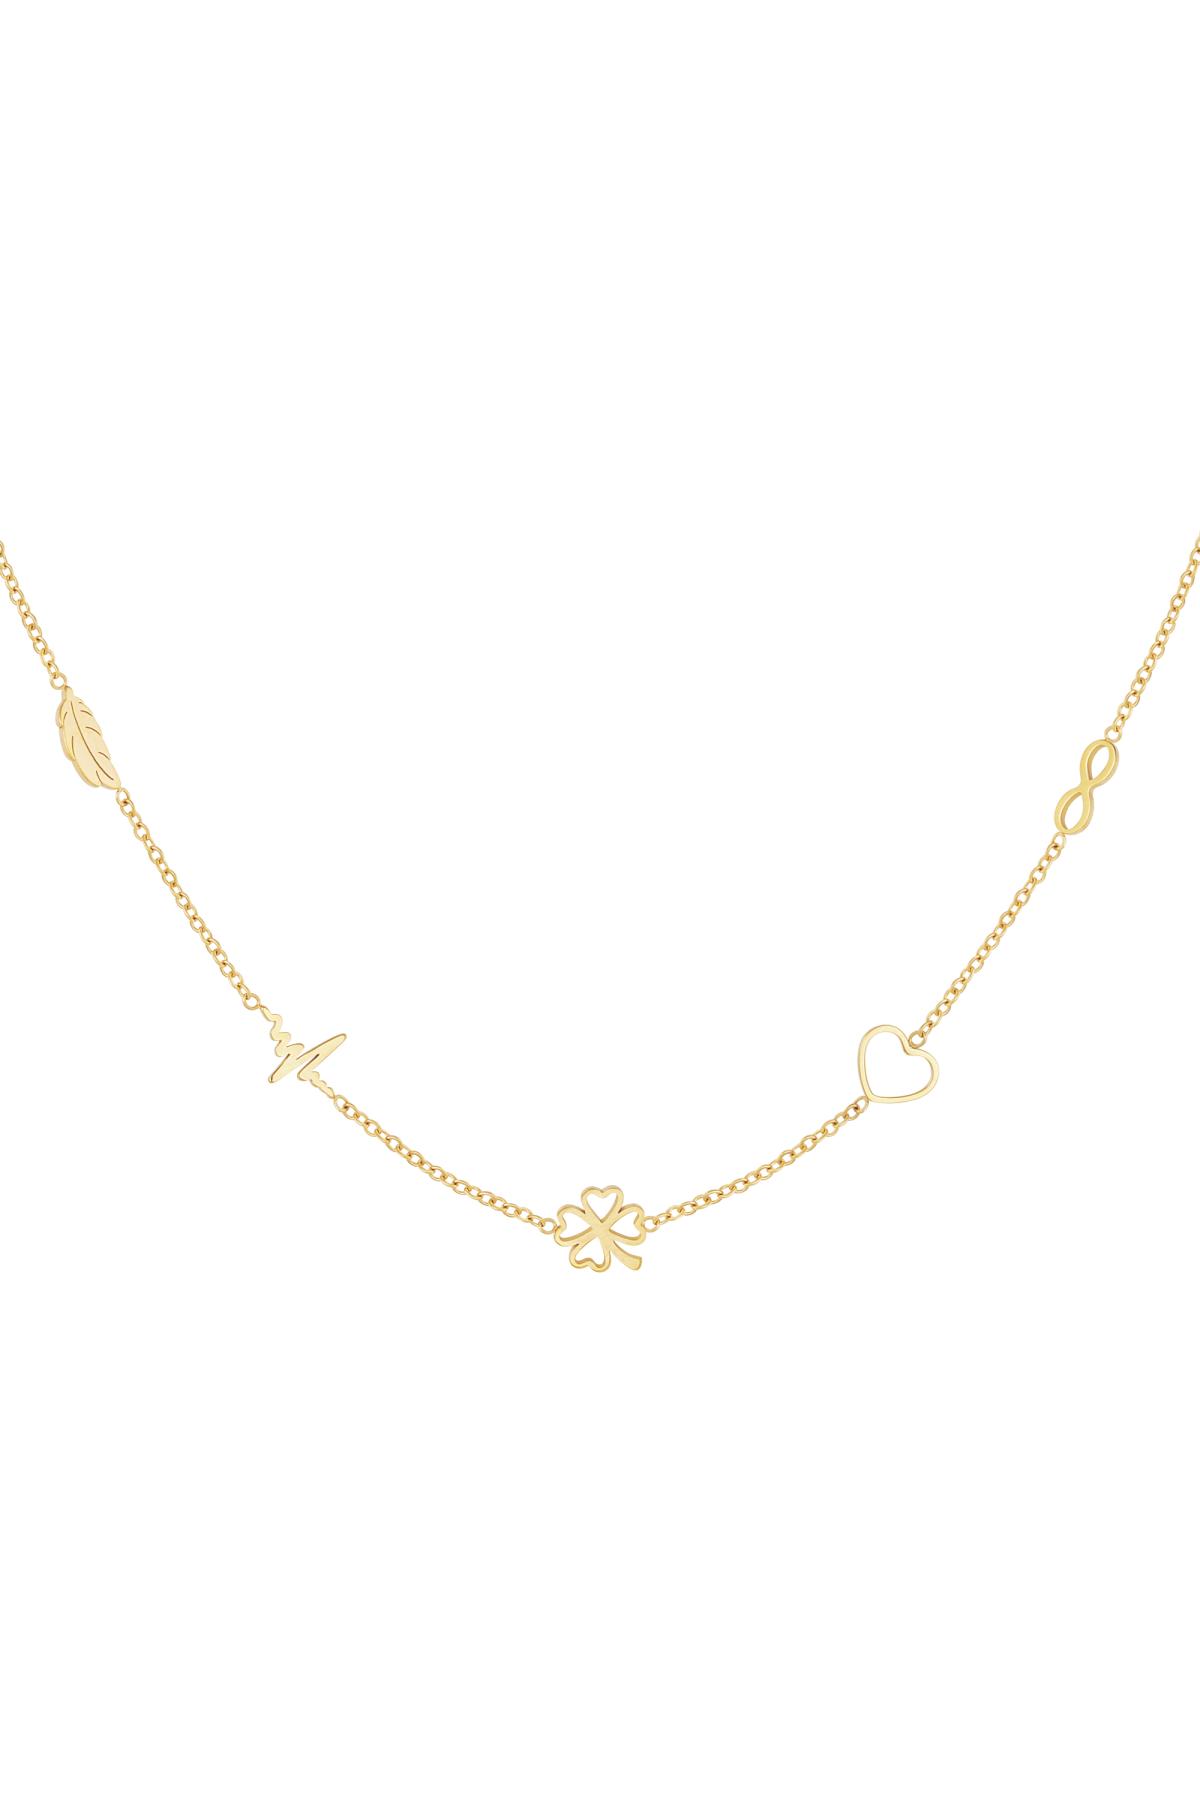 Collana minimalista con charms Gold Stainless Steel